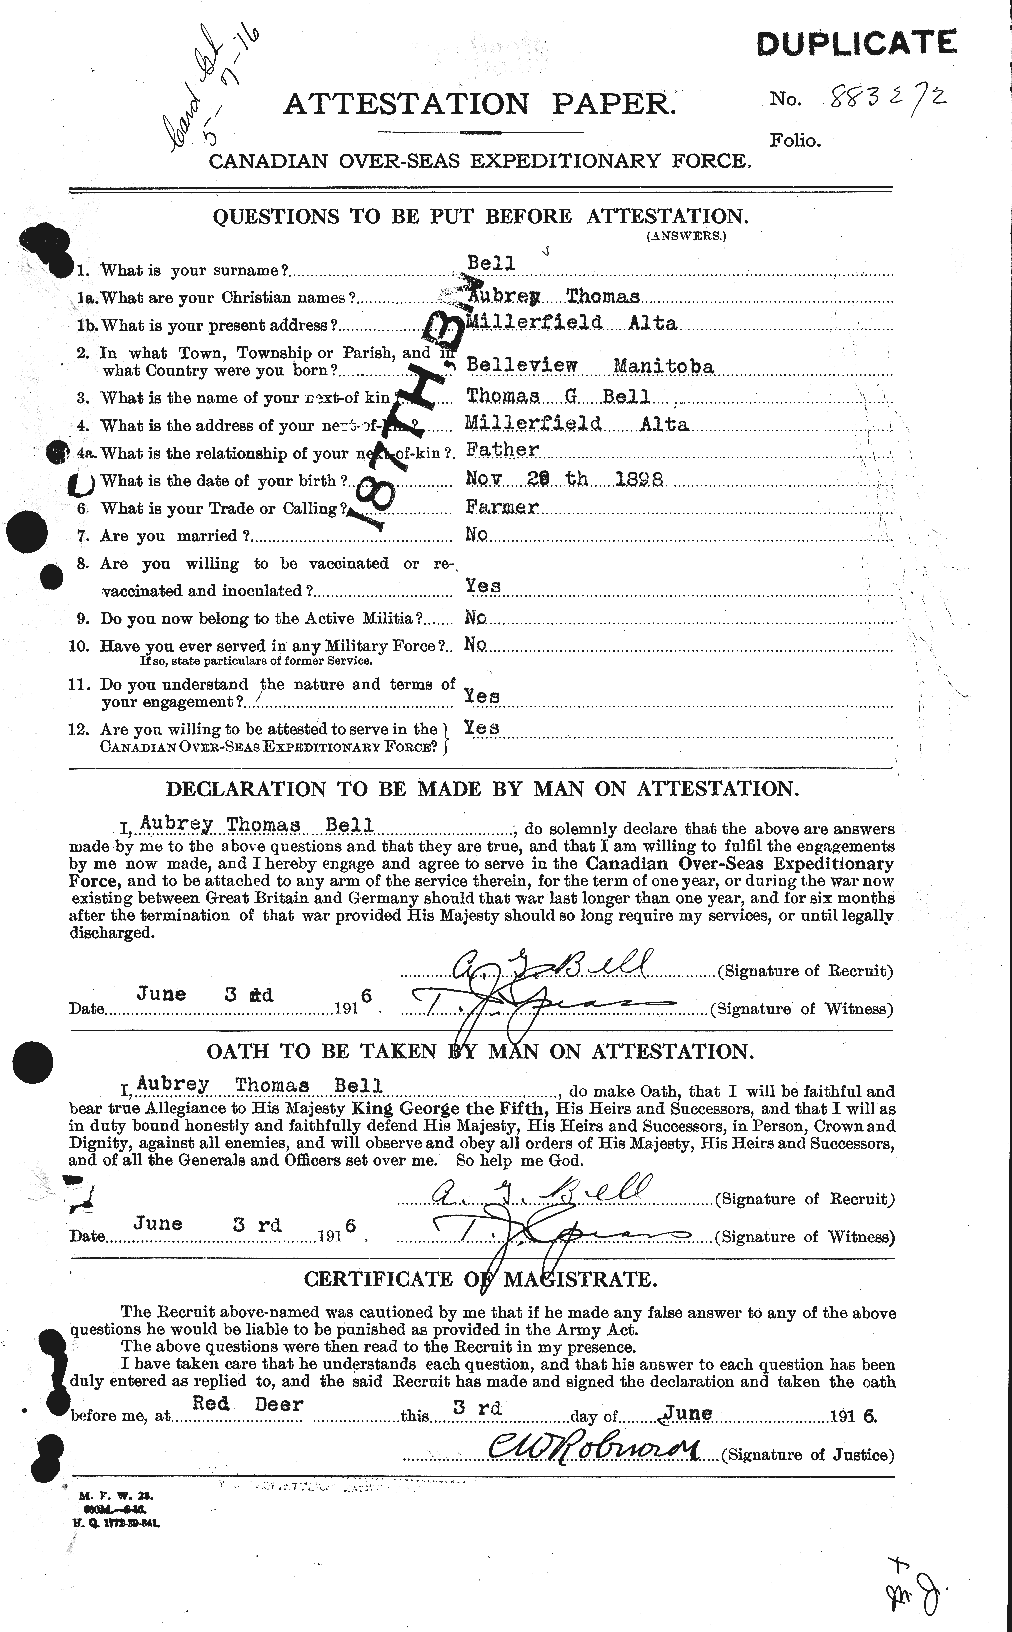 Personnel Records of the First World War - CEF 233900a